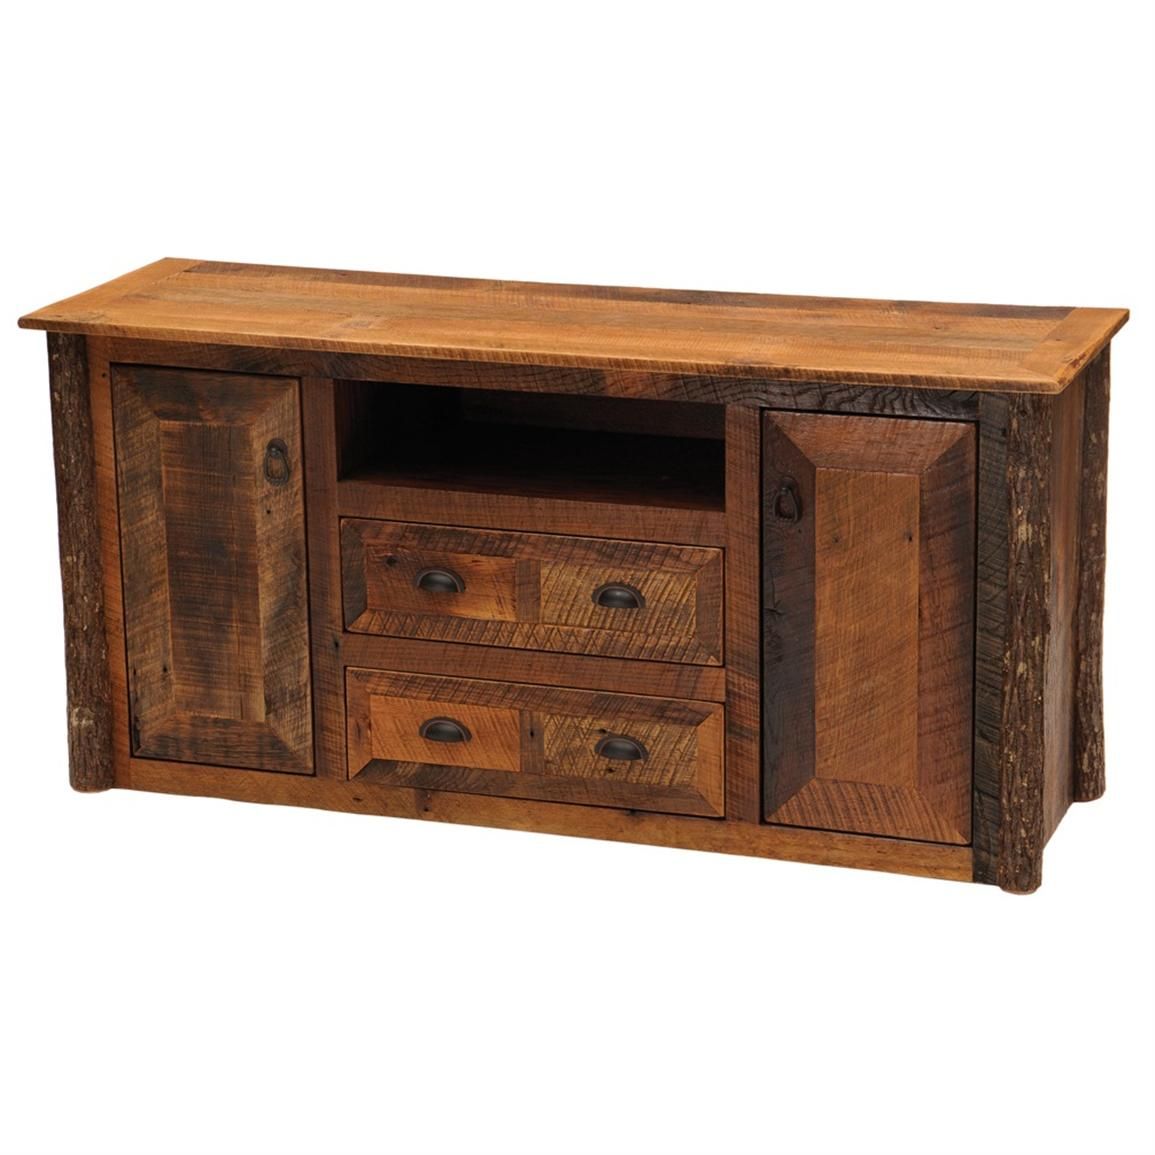 Fireside Lodge Barnwood Style Widescreen Tv Stand With Inside Widescreen Tv Stands (View 9 of 15)